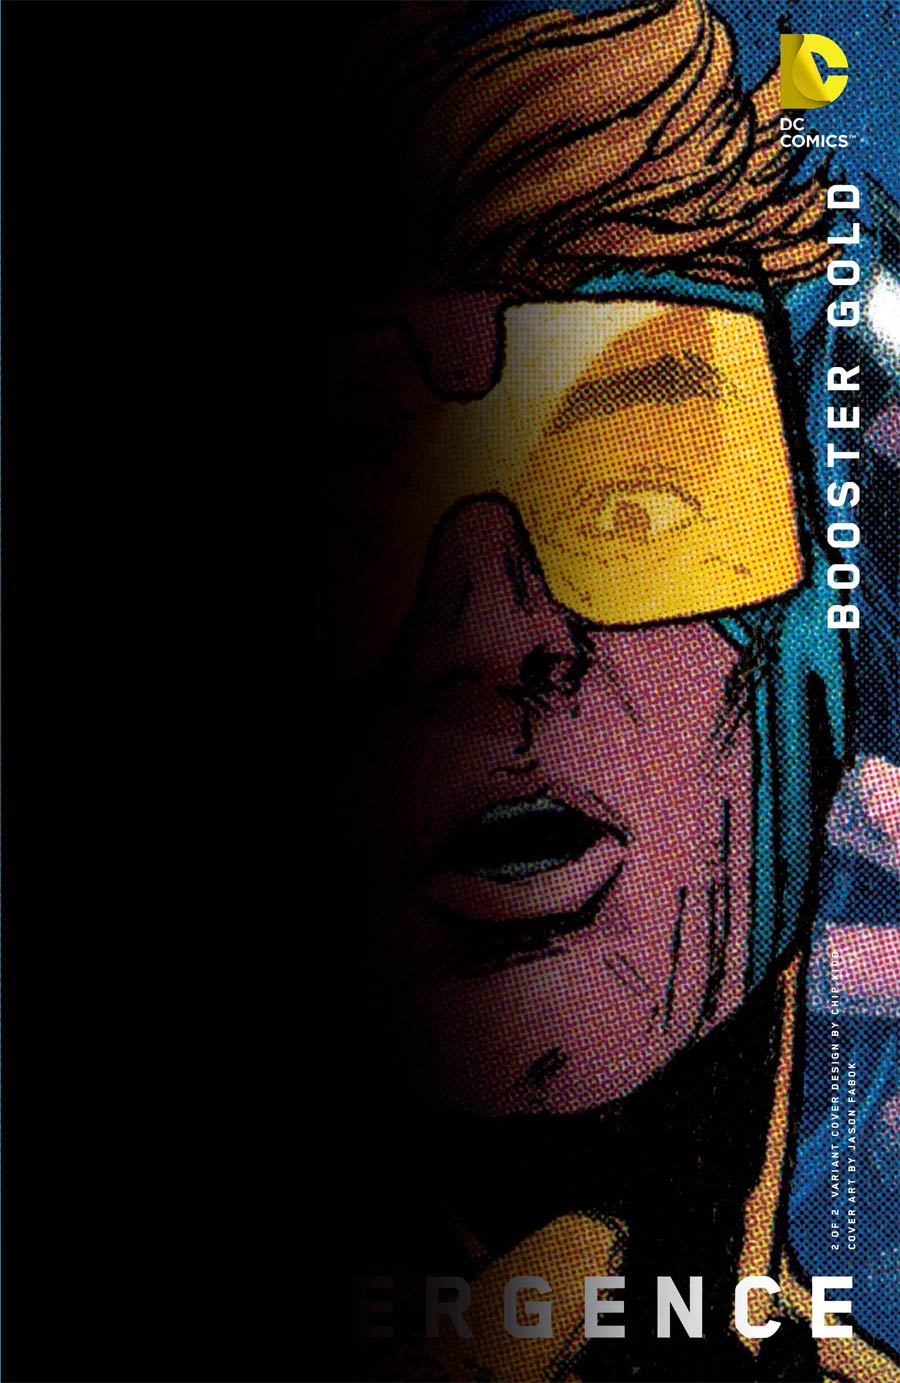 Convergence: Booster Gold #2